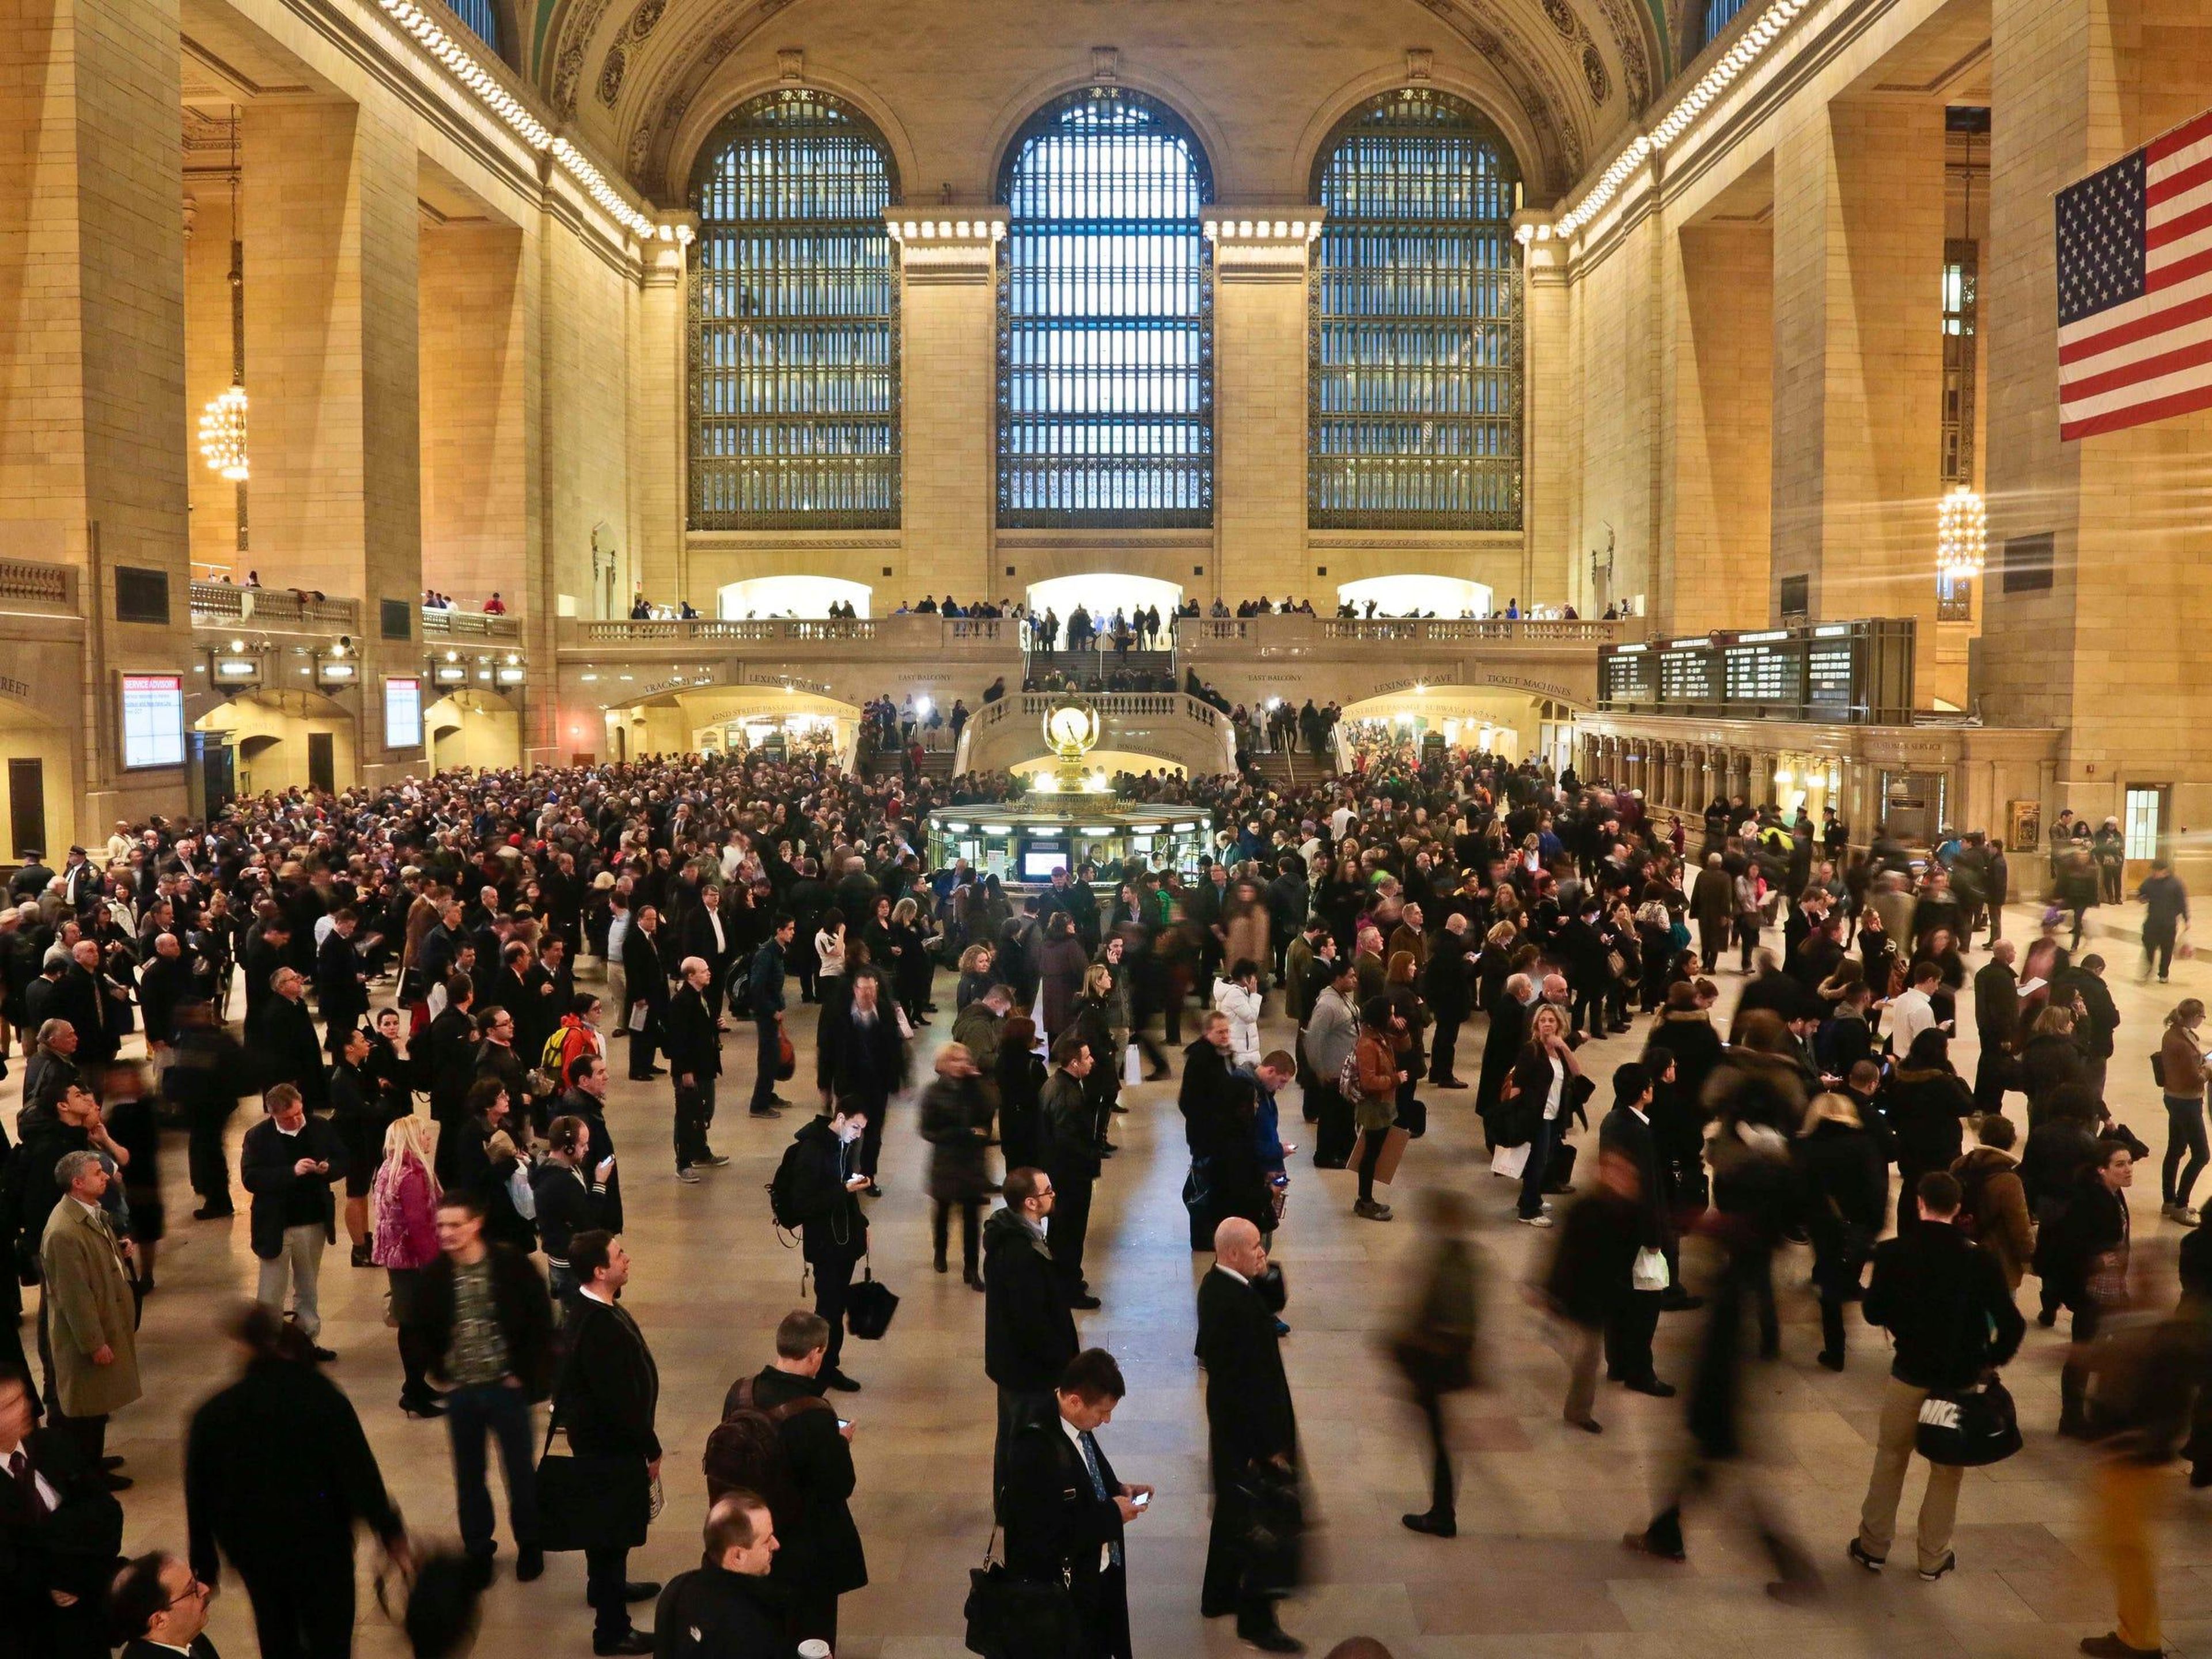 BEFORE: With about 750,000 daily visitors, Grand Central Terminal is usually one of the busiest spots in New York City.